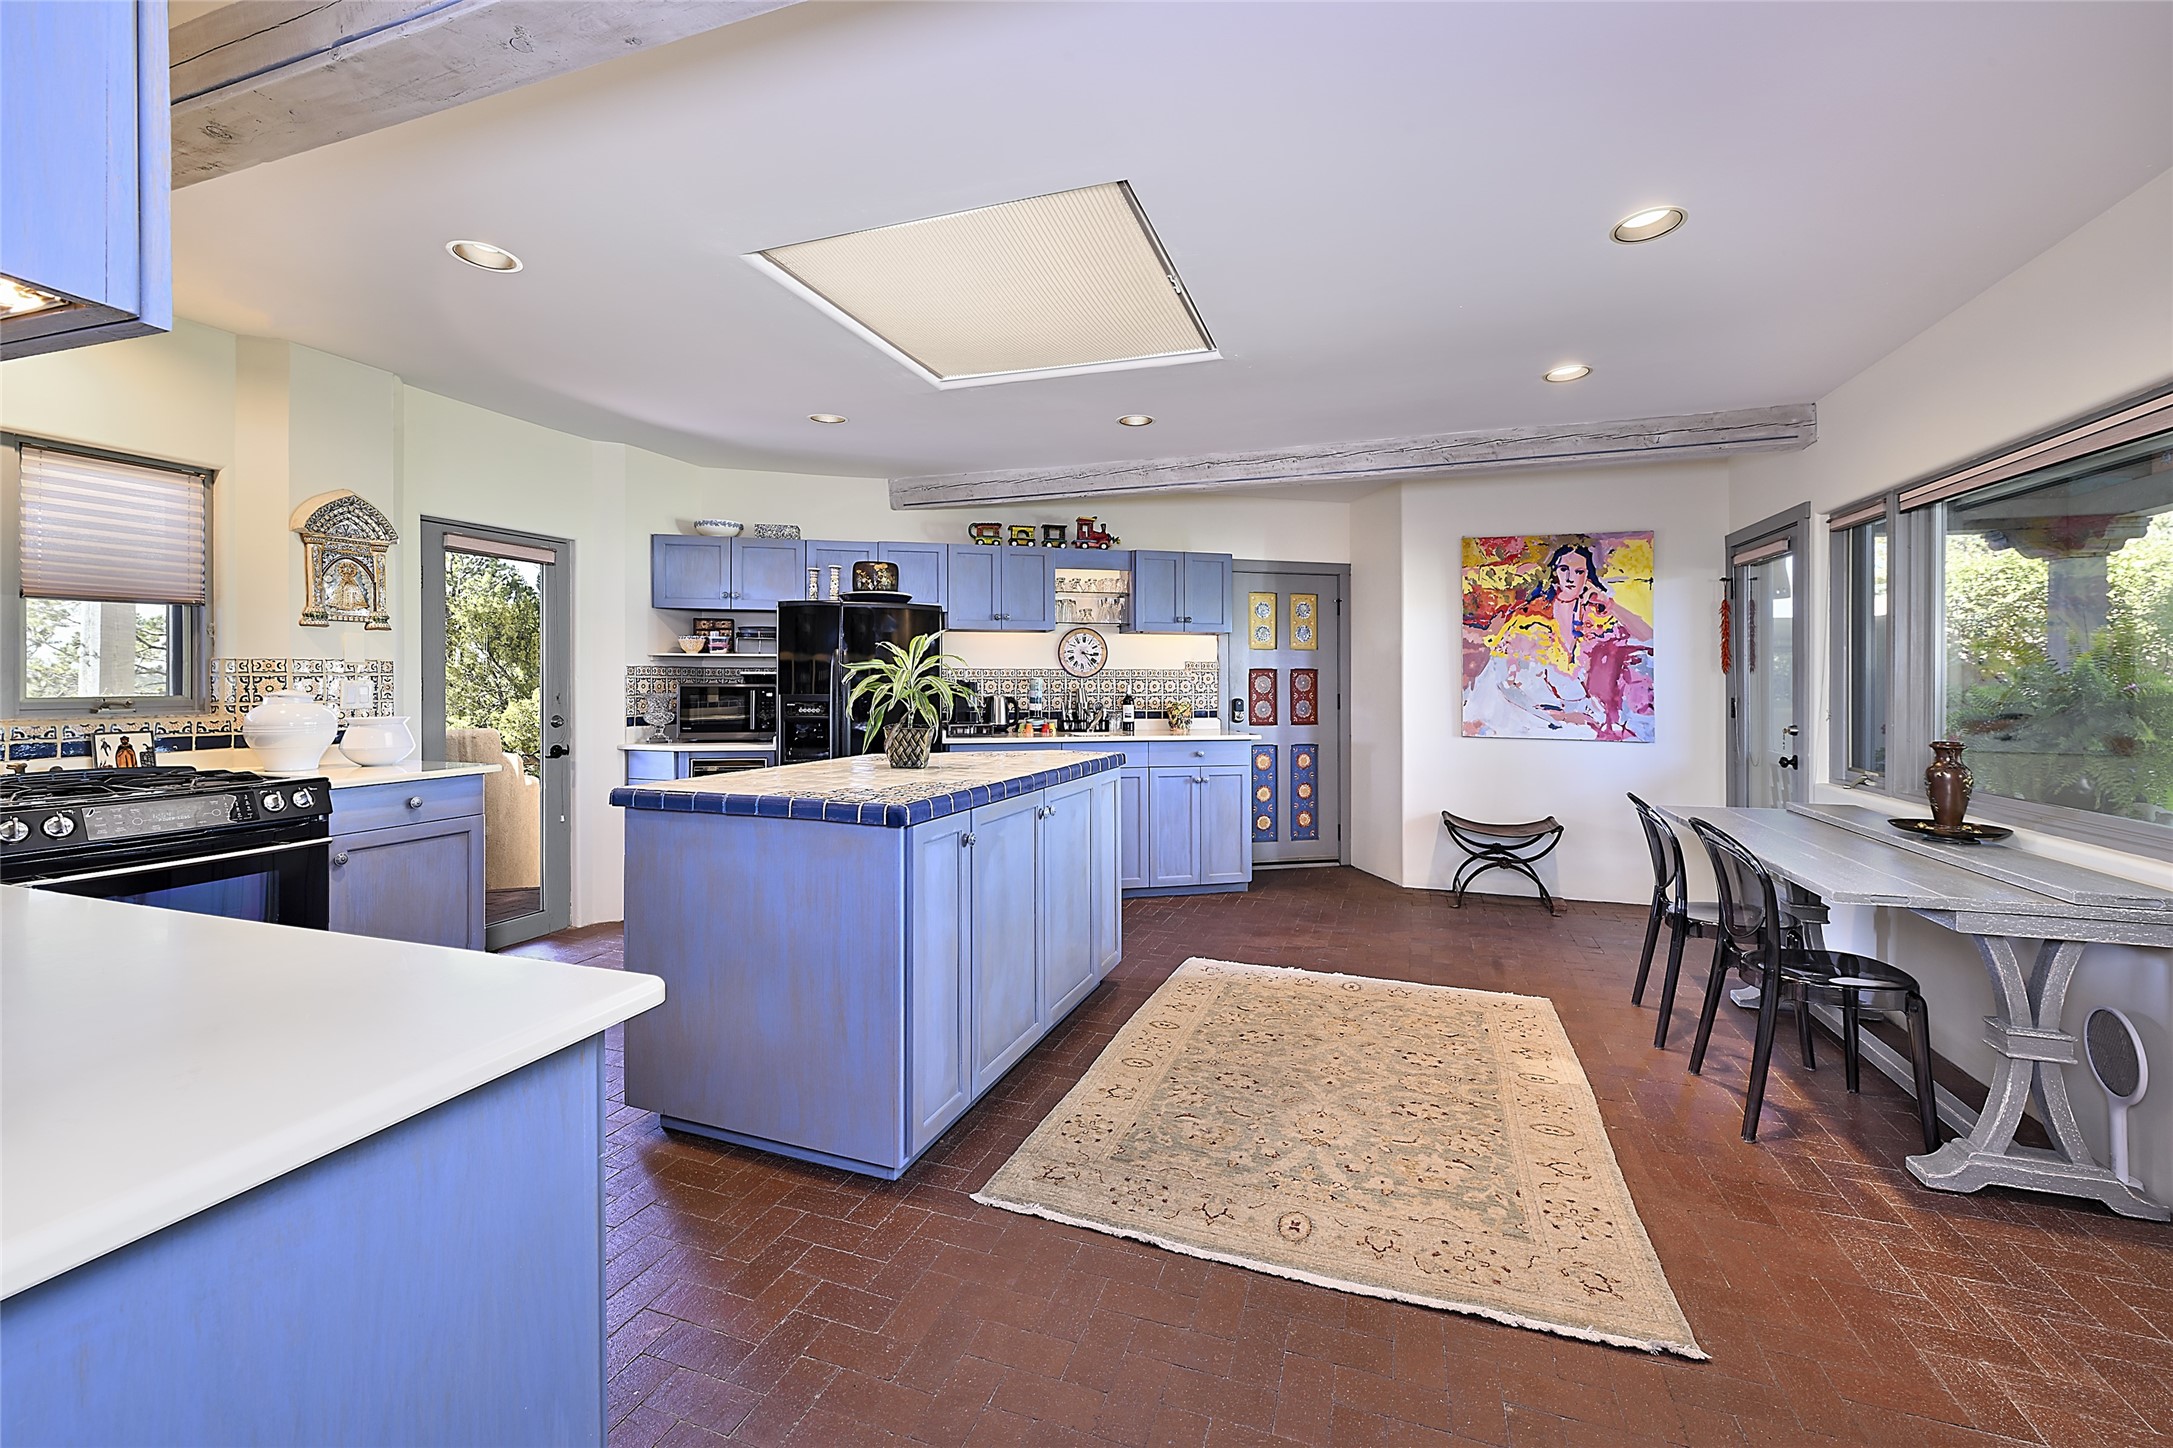 Cheerful, warm, and inviting, the home’s delightful second kitchen radiates the color and charm of Santa Fe. Vibrant ceramic tile accents the backsplashes and counters, including the center island.